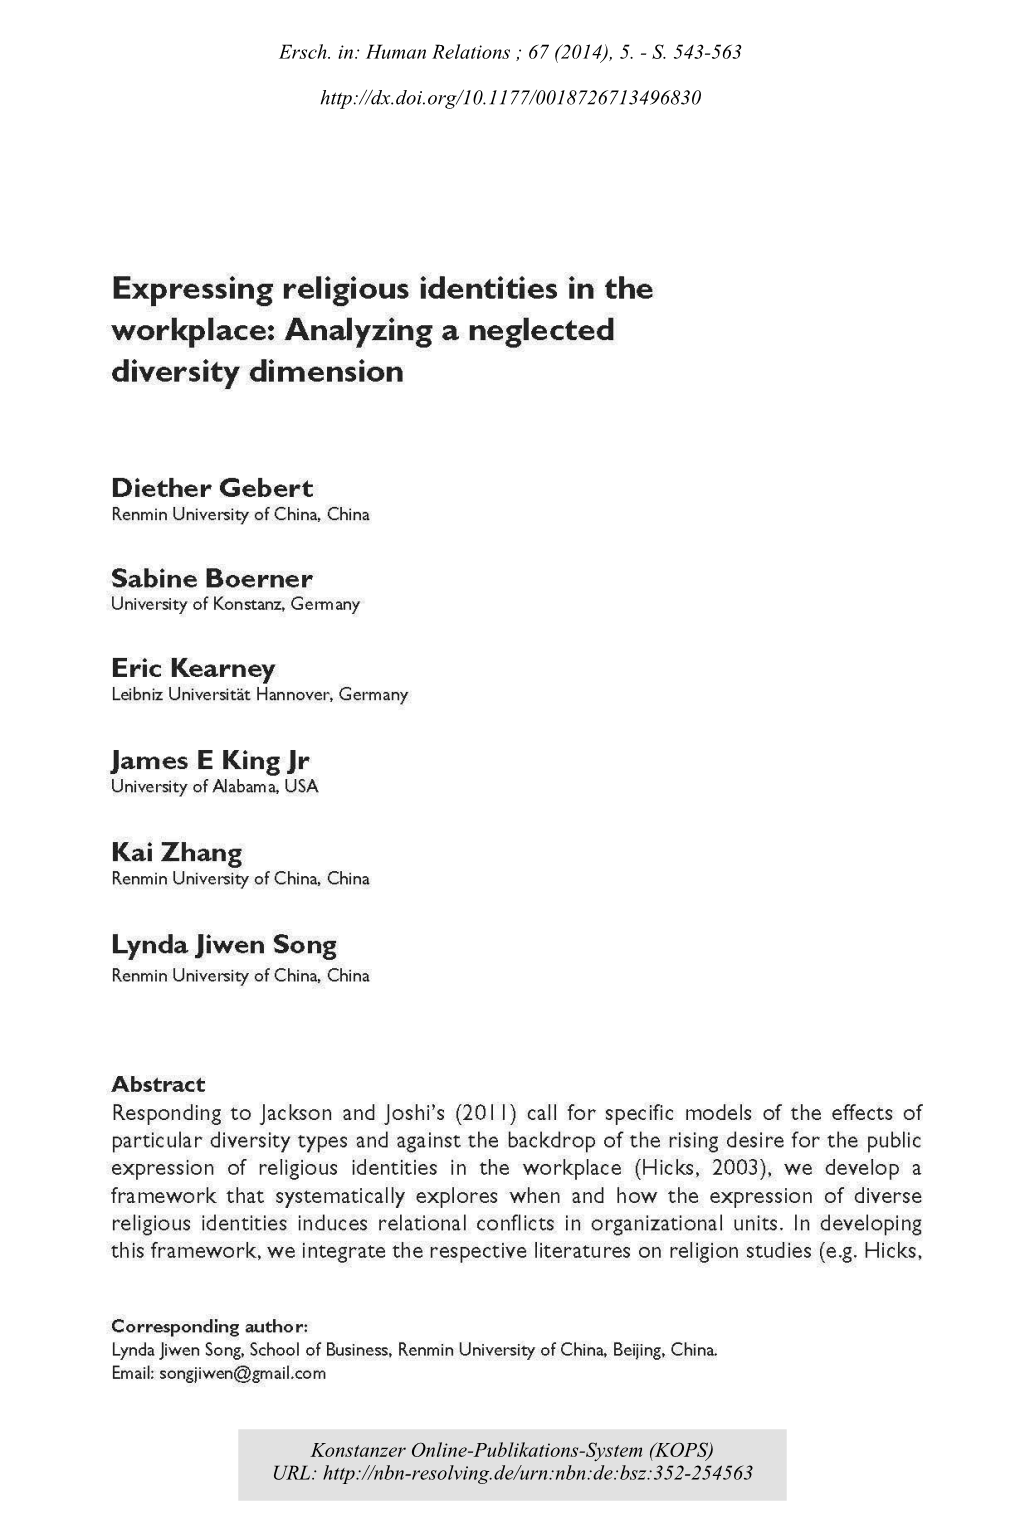 Expressing Religious Identities in the Workplace: Analyzing a Neglected Diversity Dimension